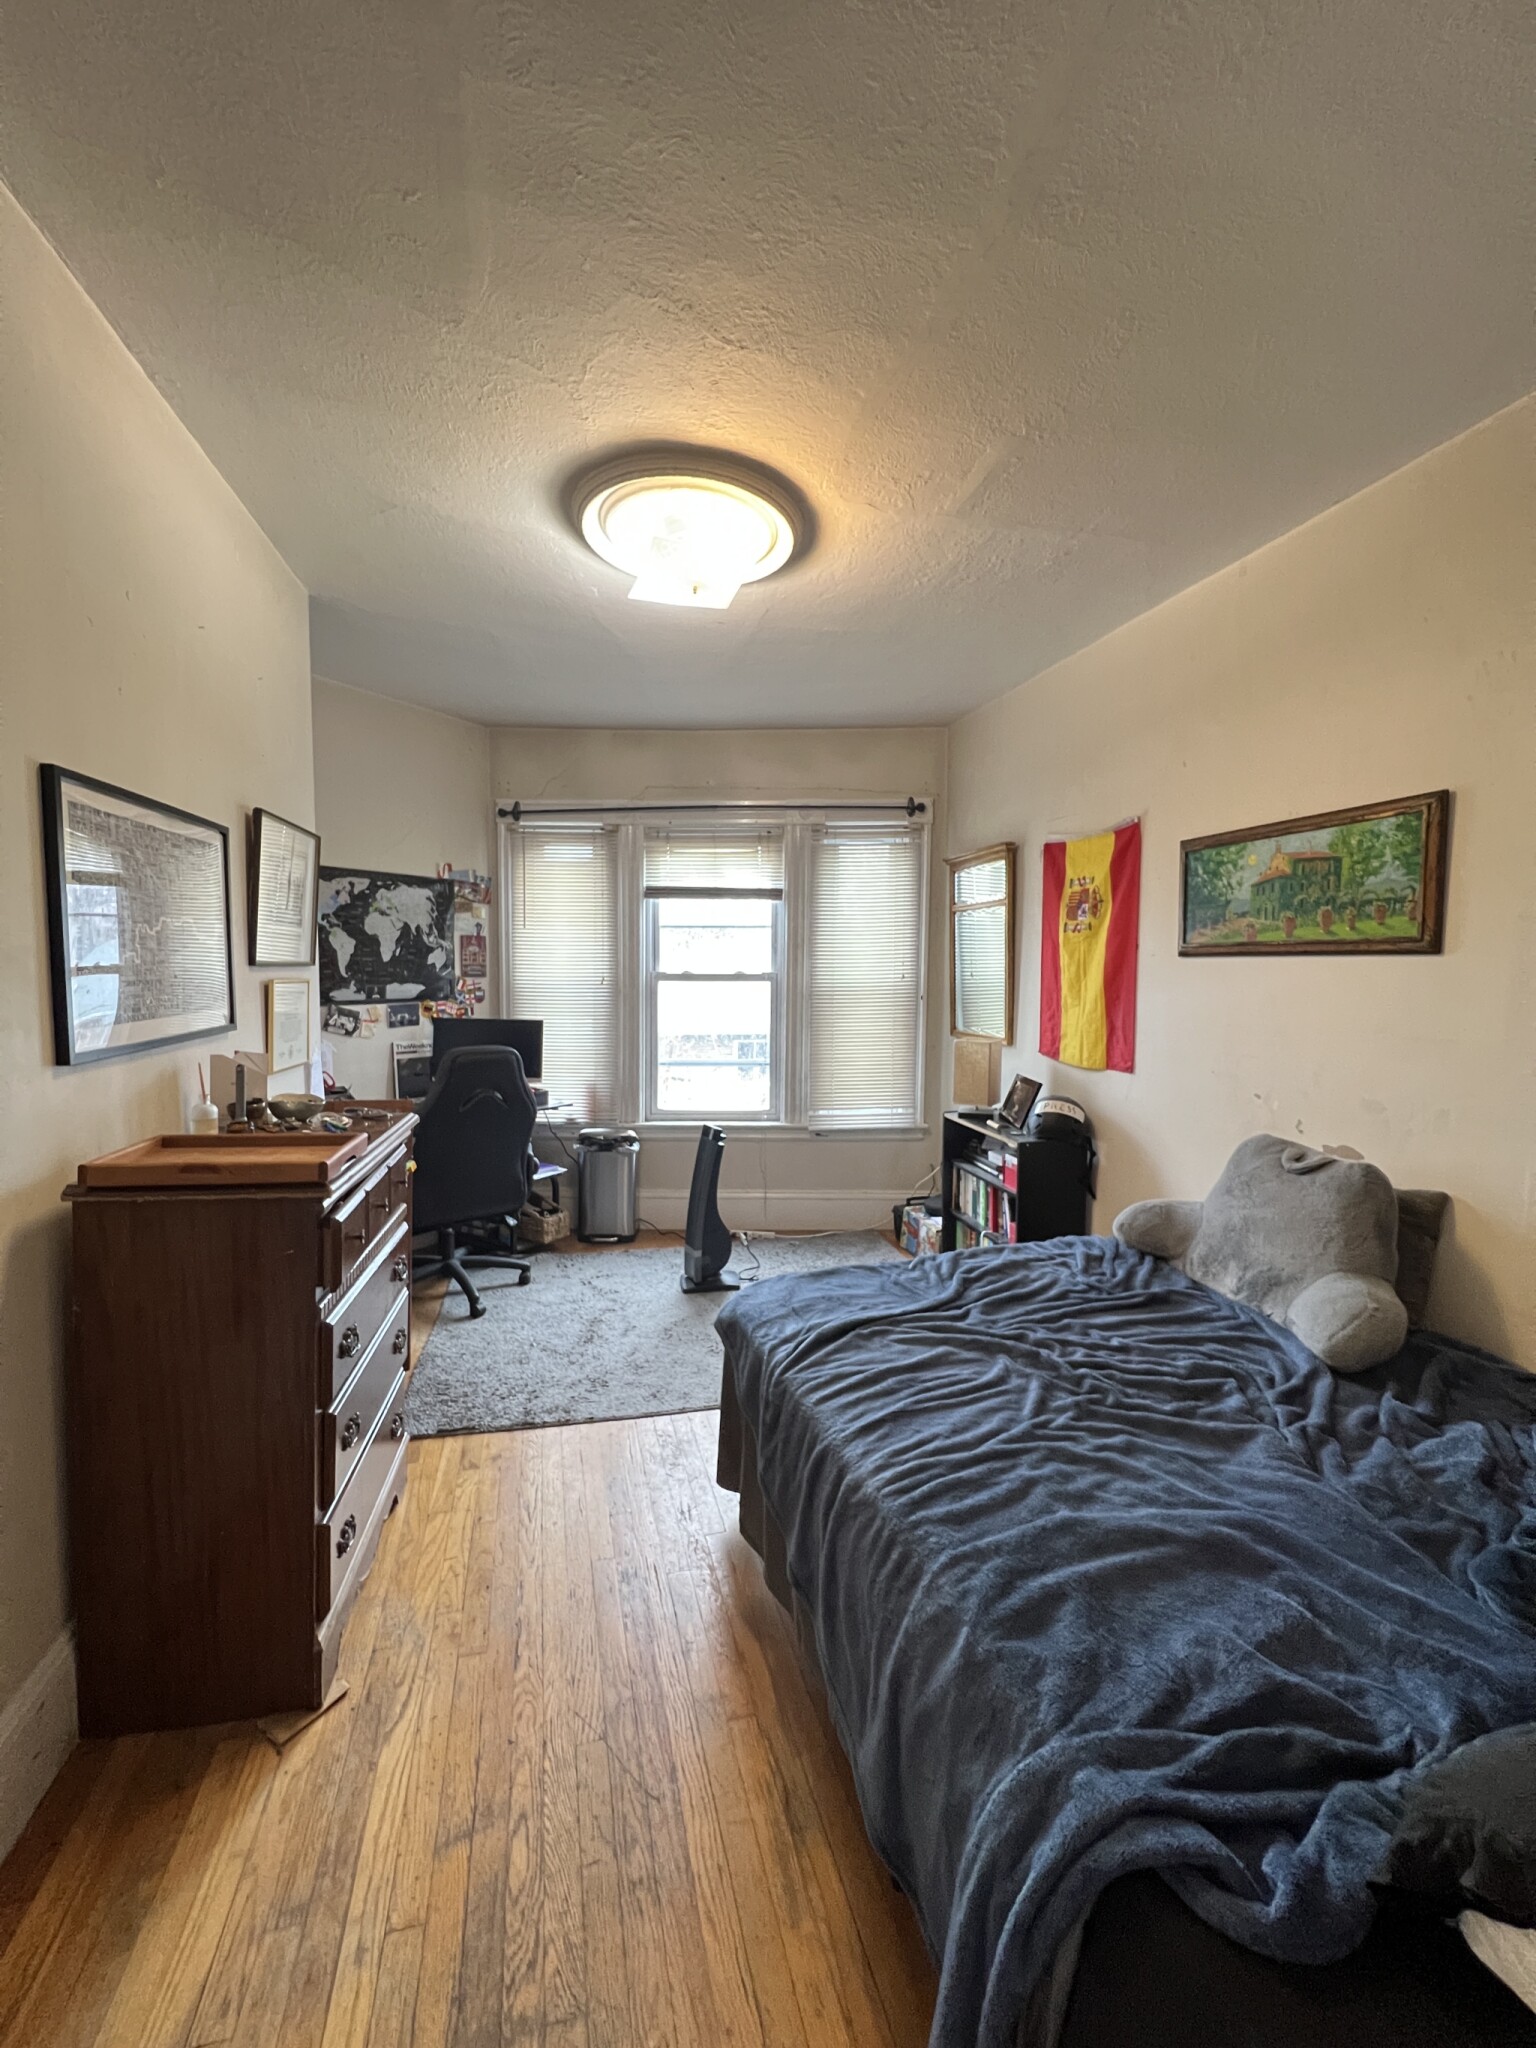 Photos of apartment on Summer St.,Somerville MA 02143